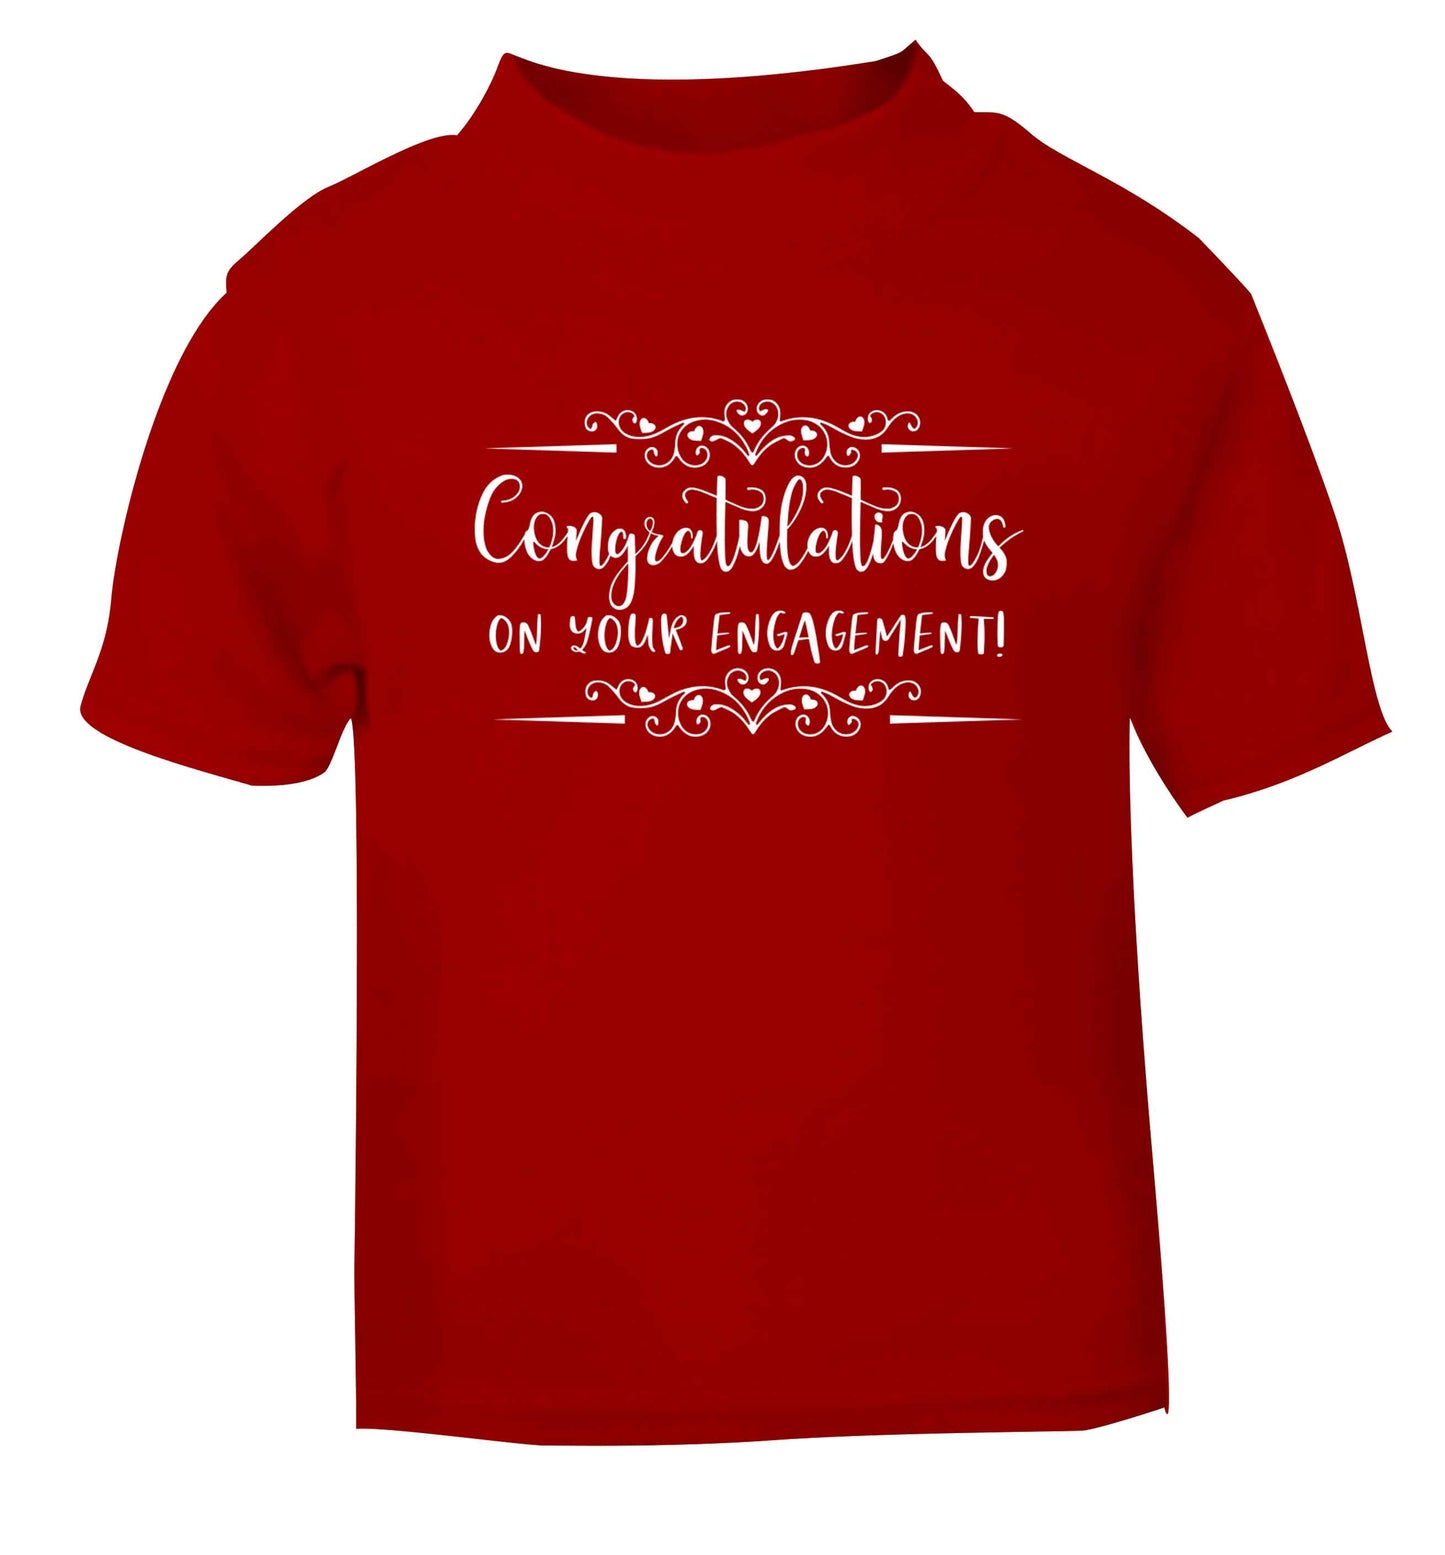 Congratulations on your engagement red baby toddler Tshirt 2 Years